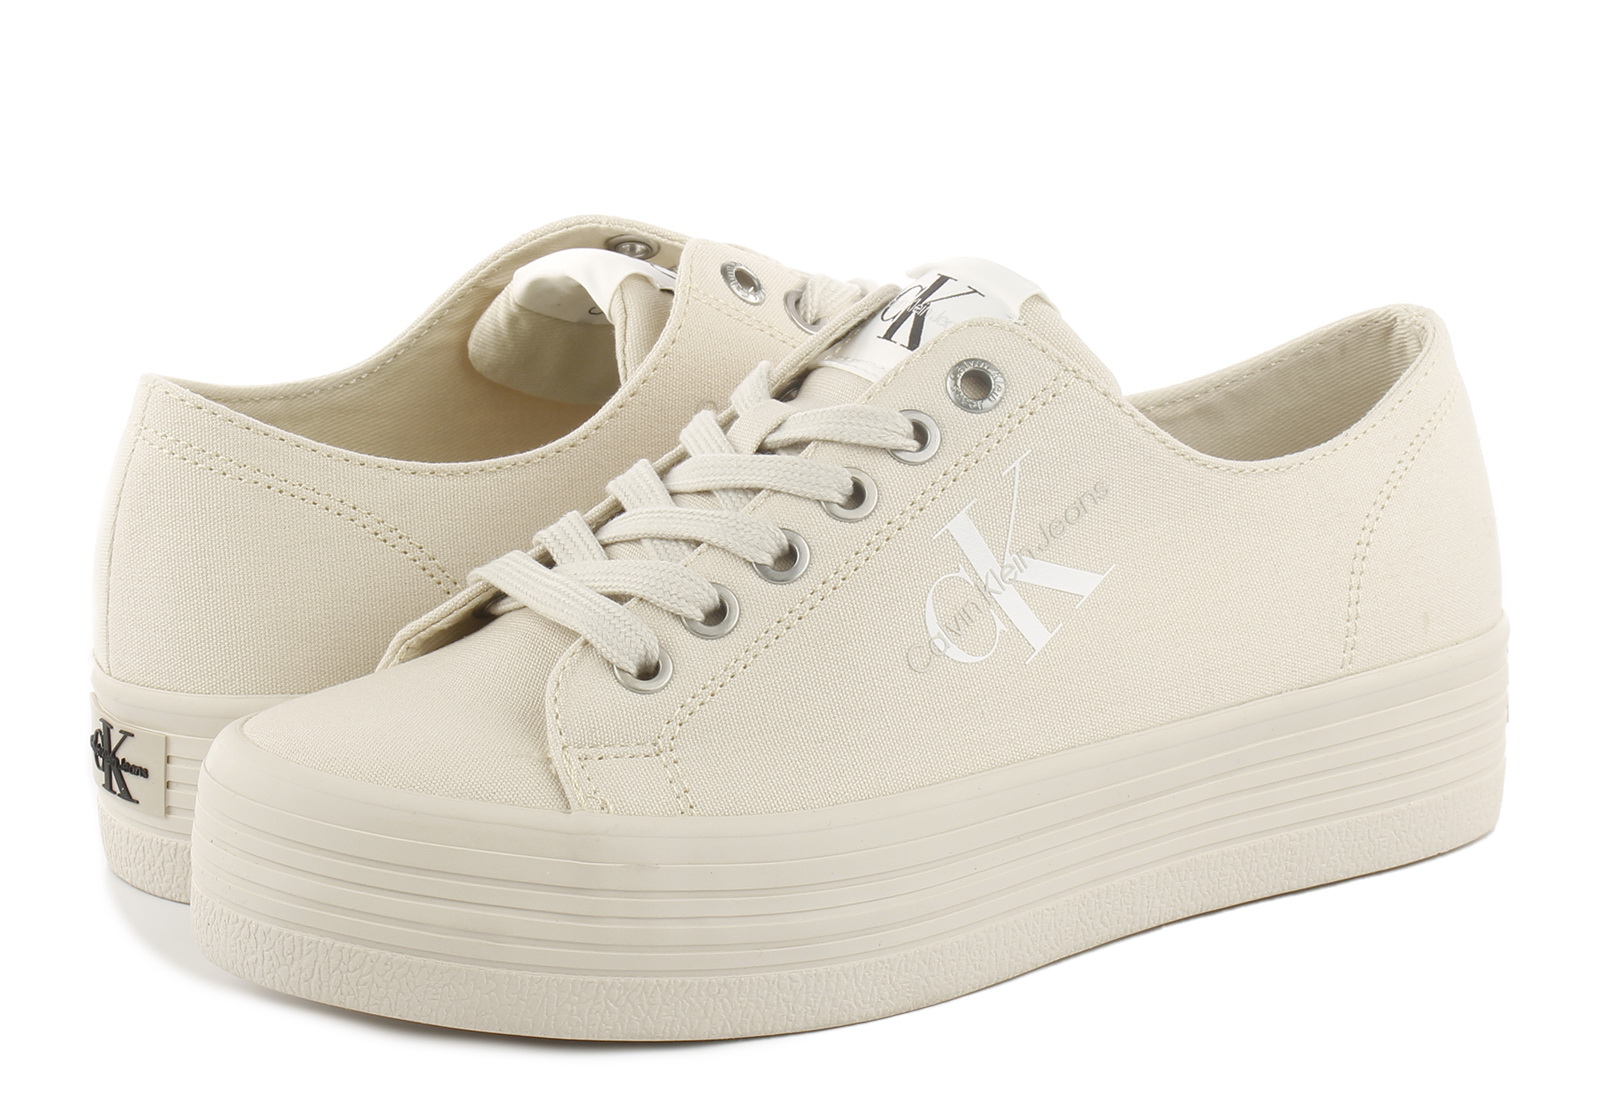 Calvin Klein Jeans Trainers - Shivary 4d - YW00254-ACF - Online shop for  sneakers, shoes and boots